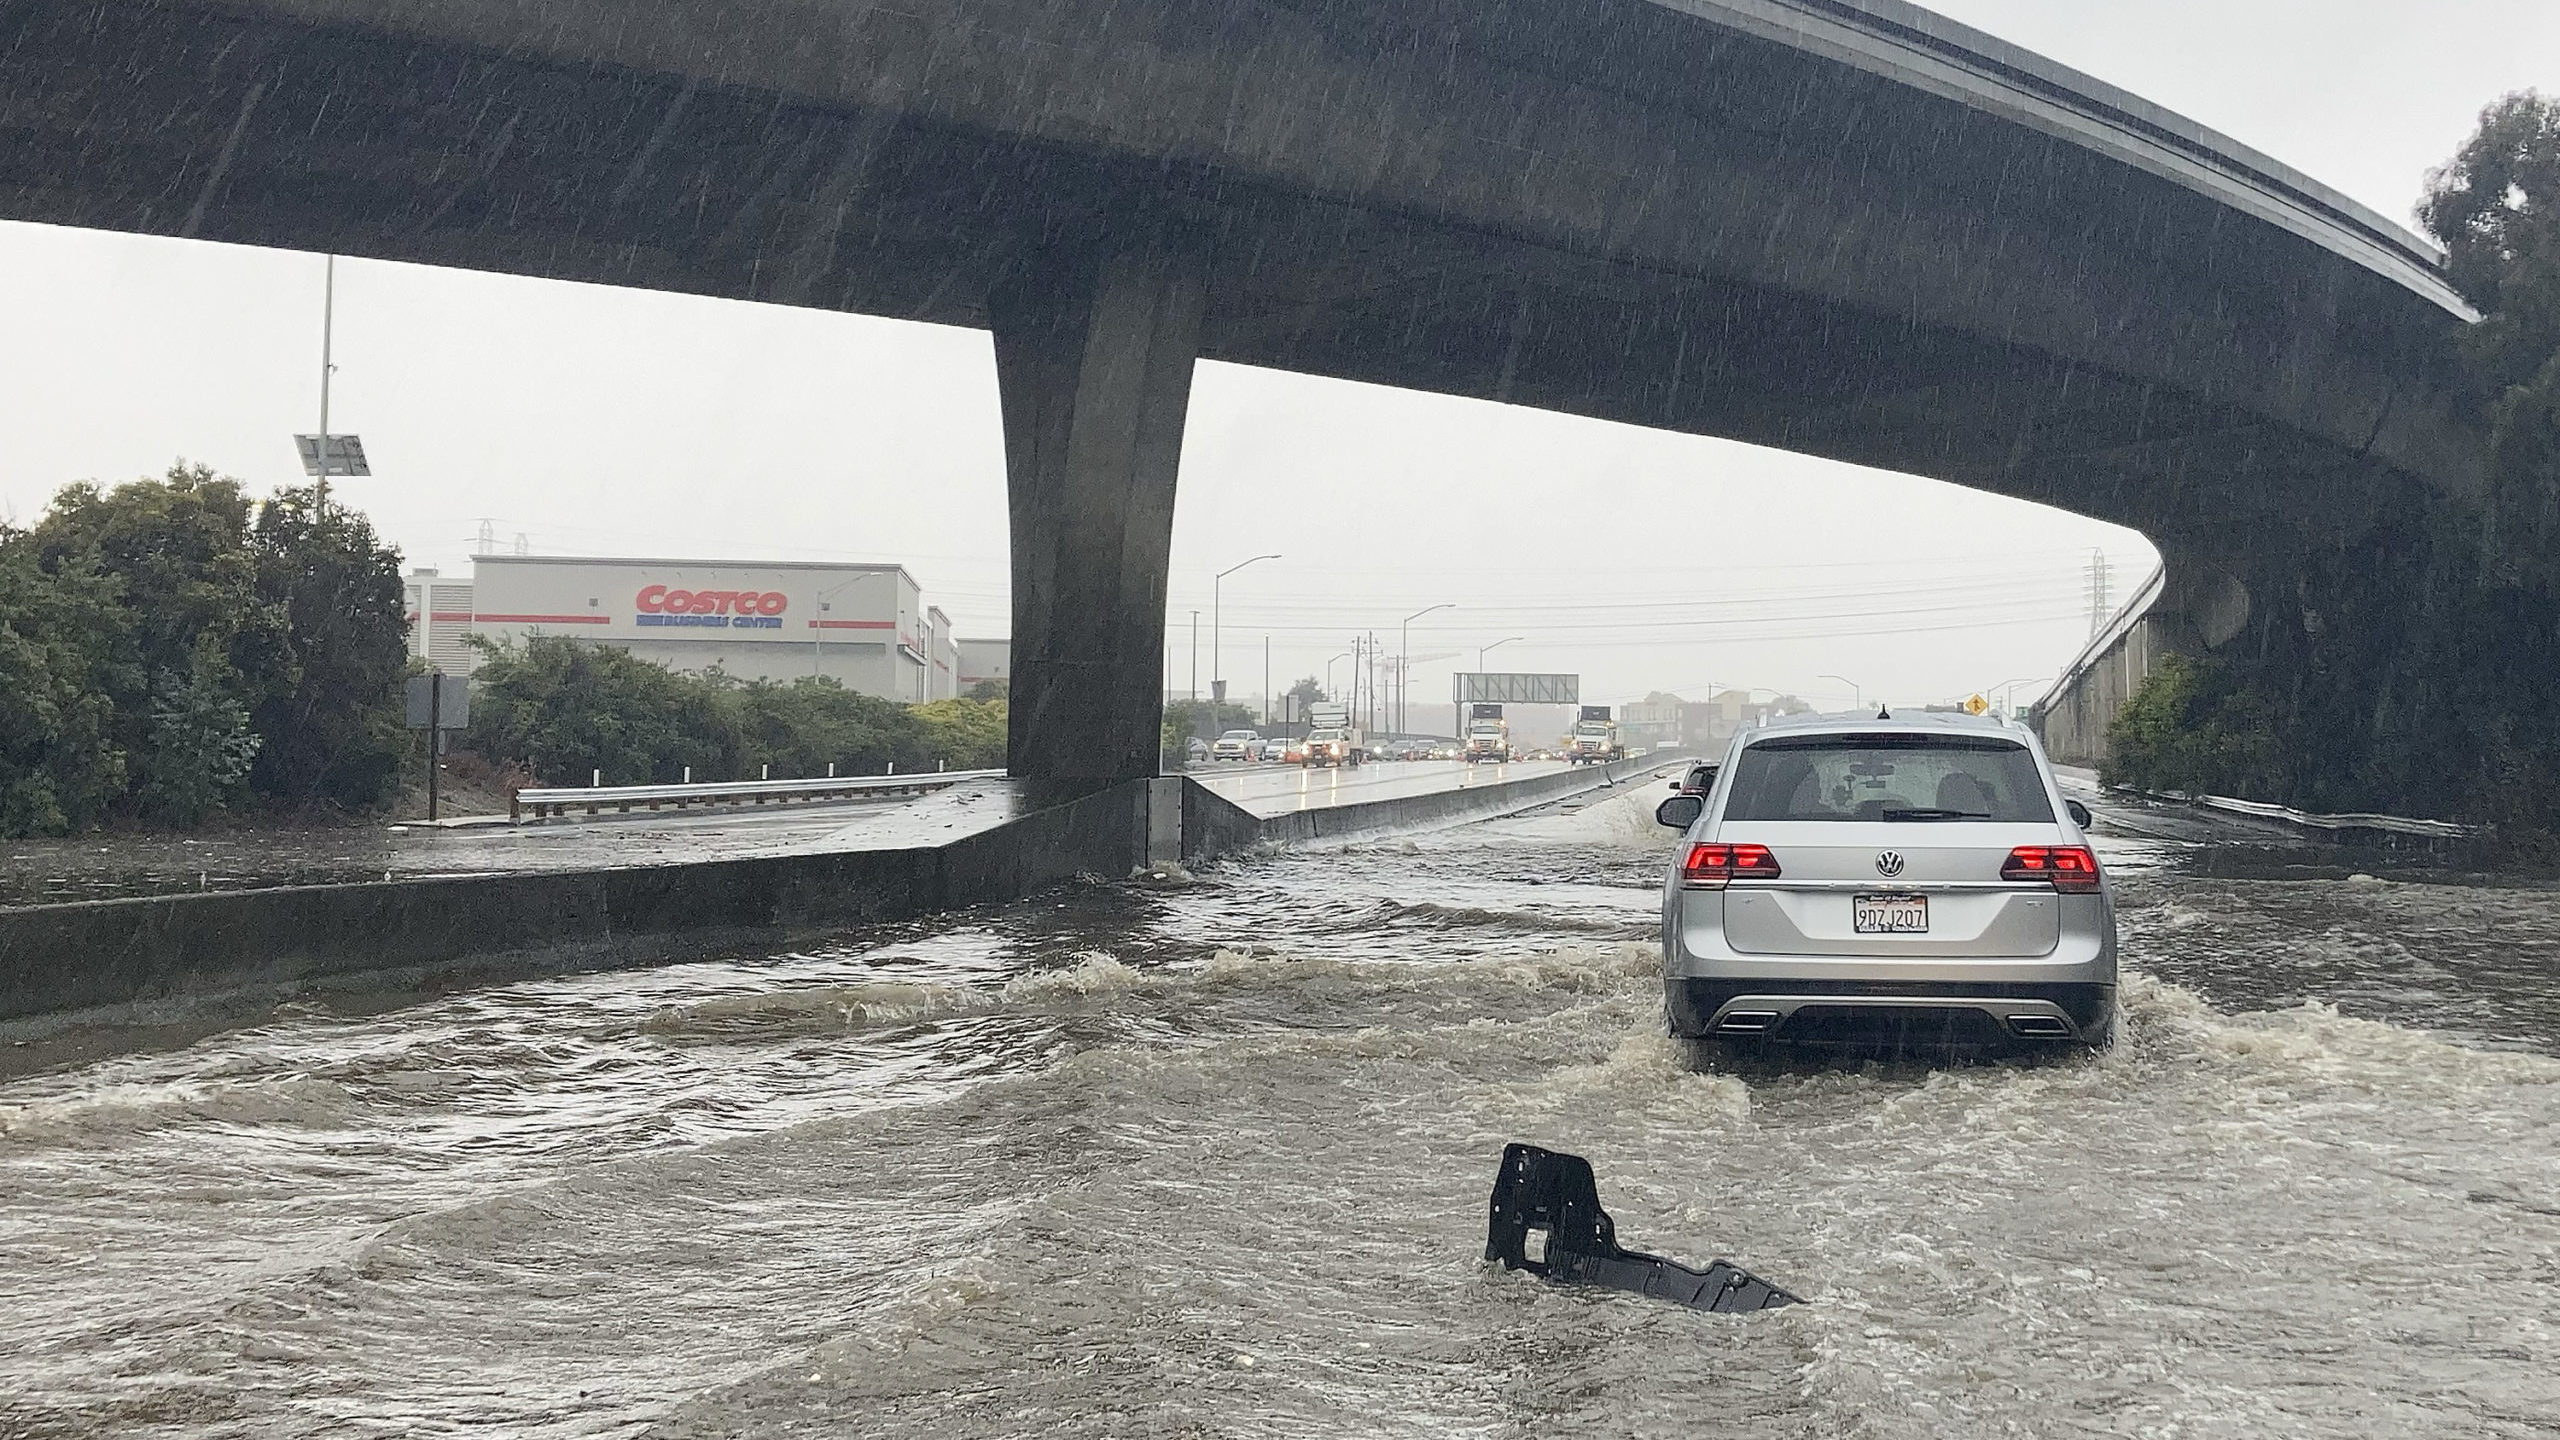 A powerful storm brought drenching rain or heavy snowfall to much of California on Saturday, snarli...